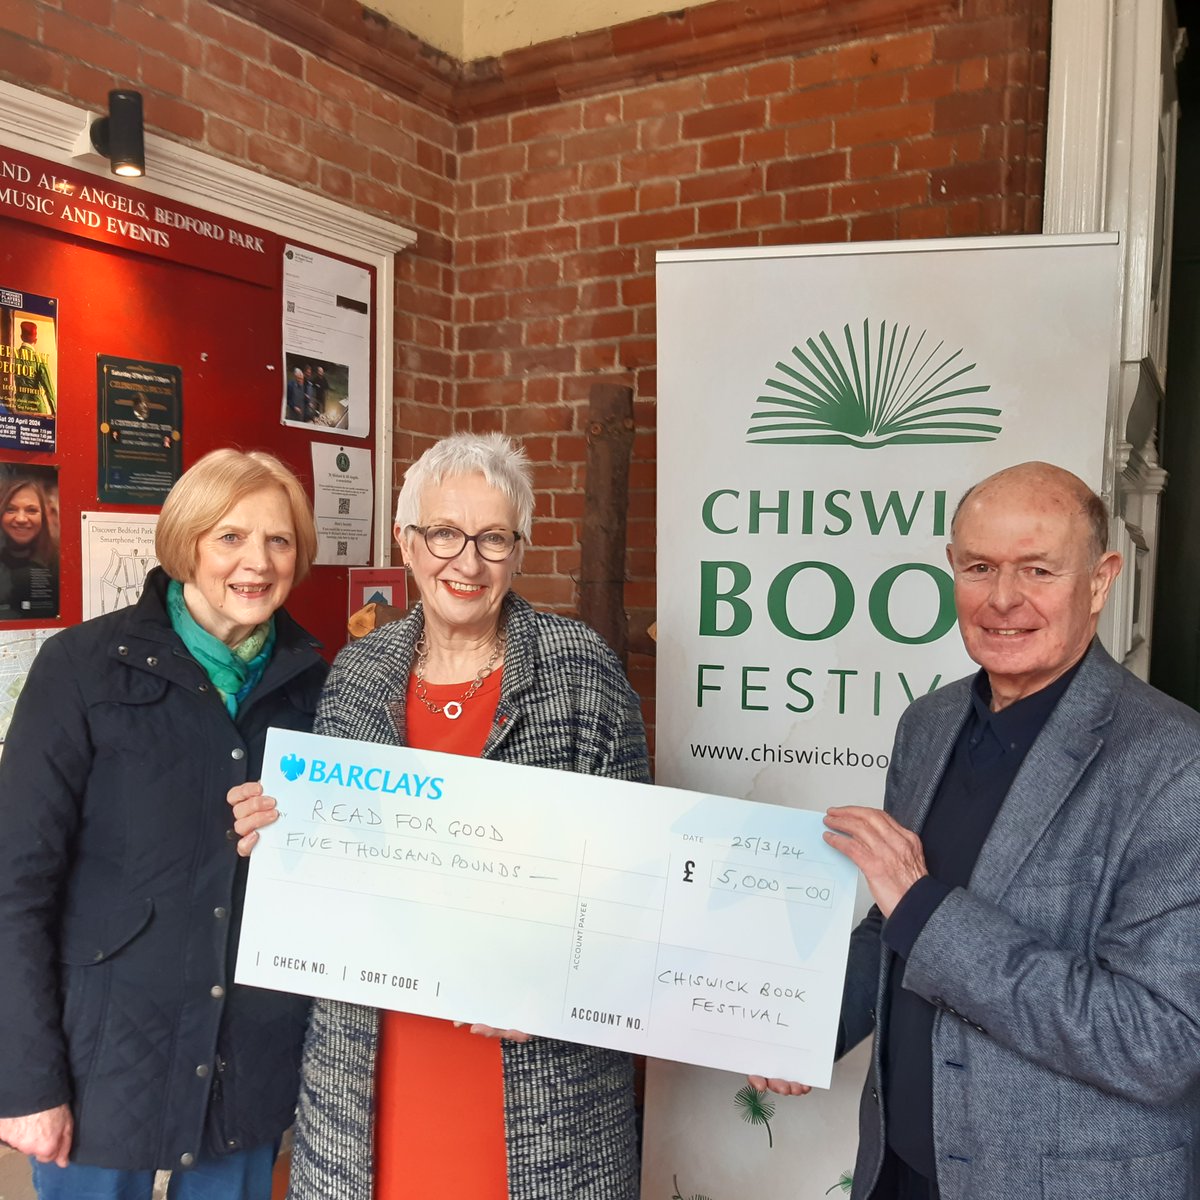 Thank you to Chiswick Book Festival who have raised an incredible £5,000 for Read for Good this year through the festival. We are so grateful for their ongoing support.  Here is lovely Helen, a RfG trustee collecting the giant cheque for us! 🧡📚😊 @W4BookFest #fundraising